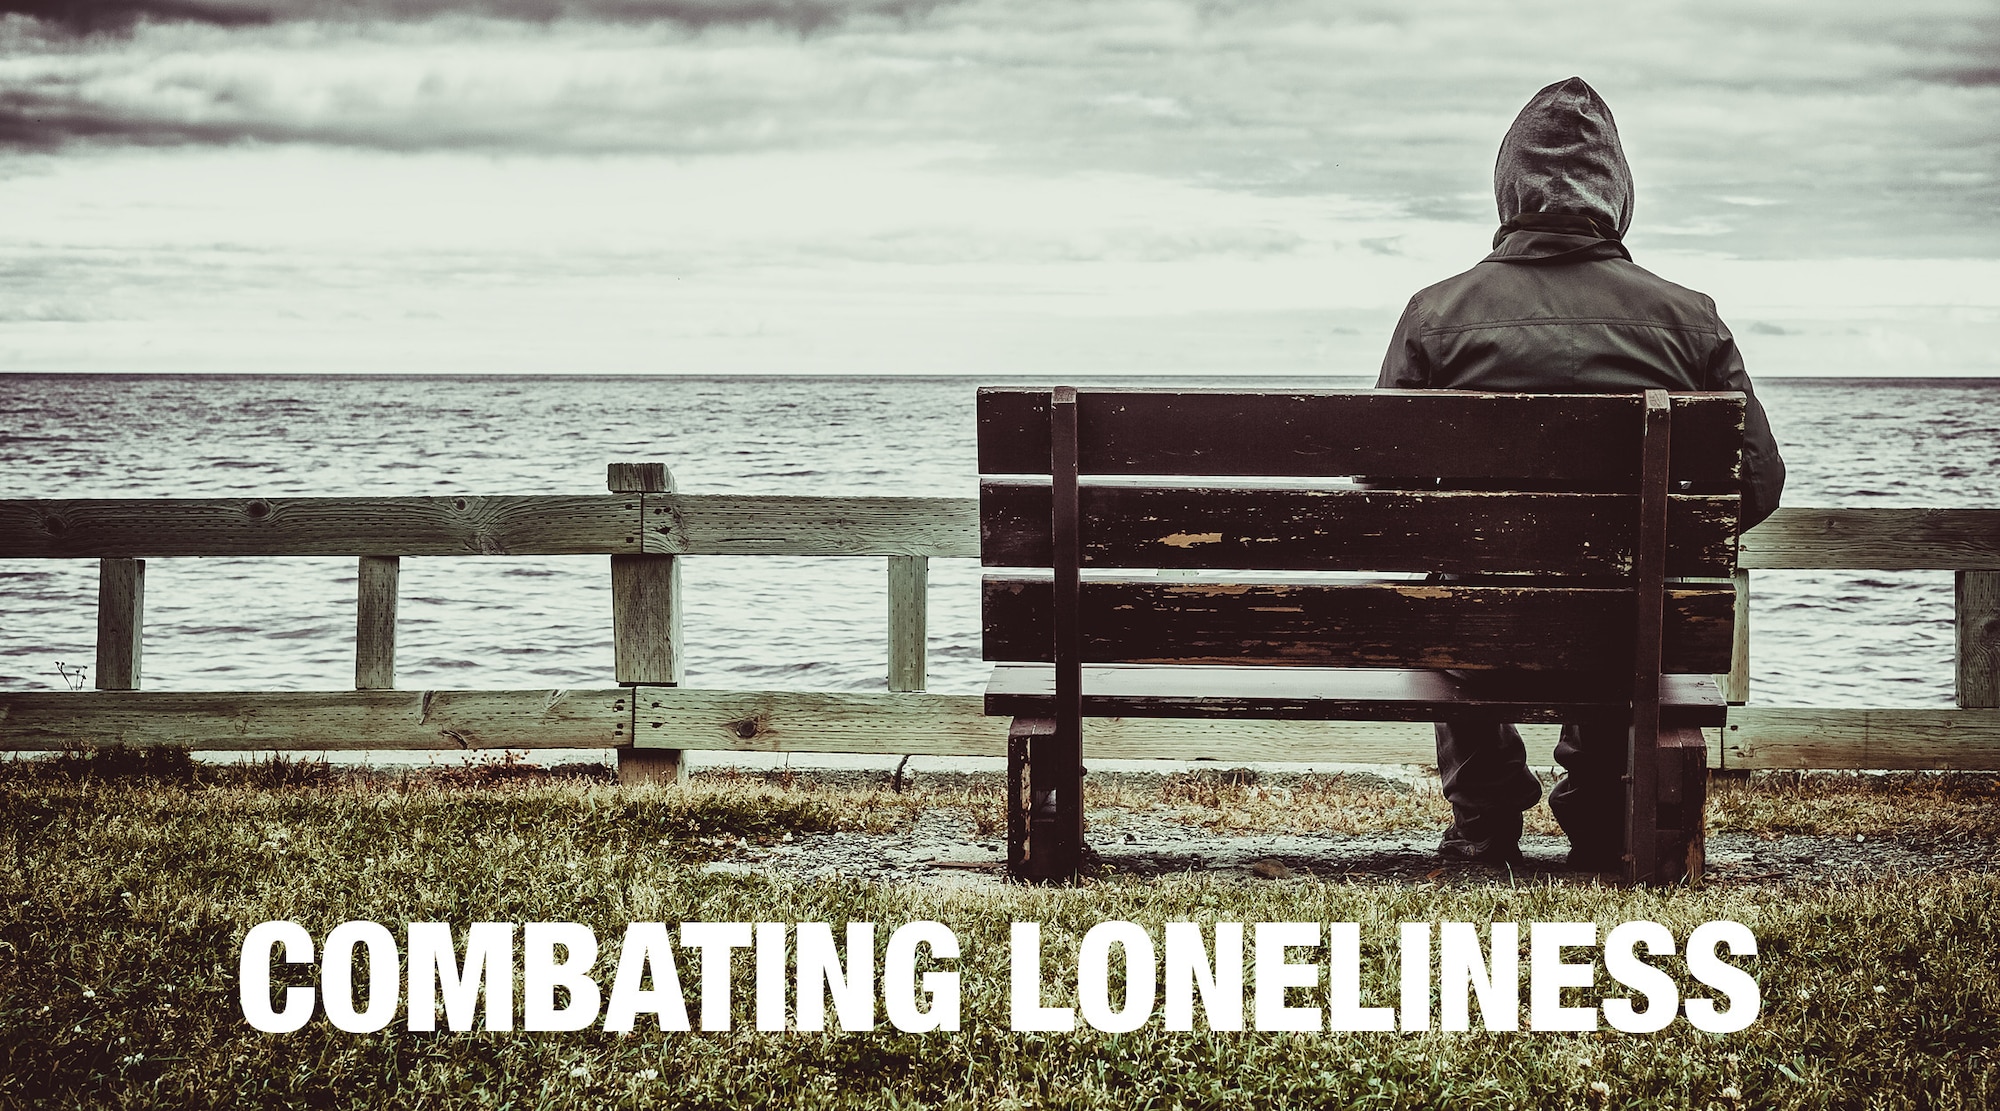 Courtesy photo, Combating loneliness